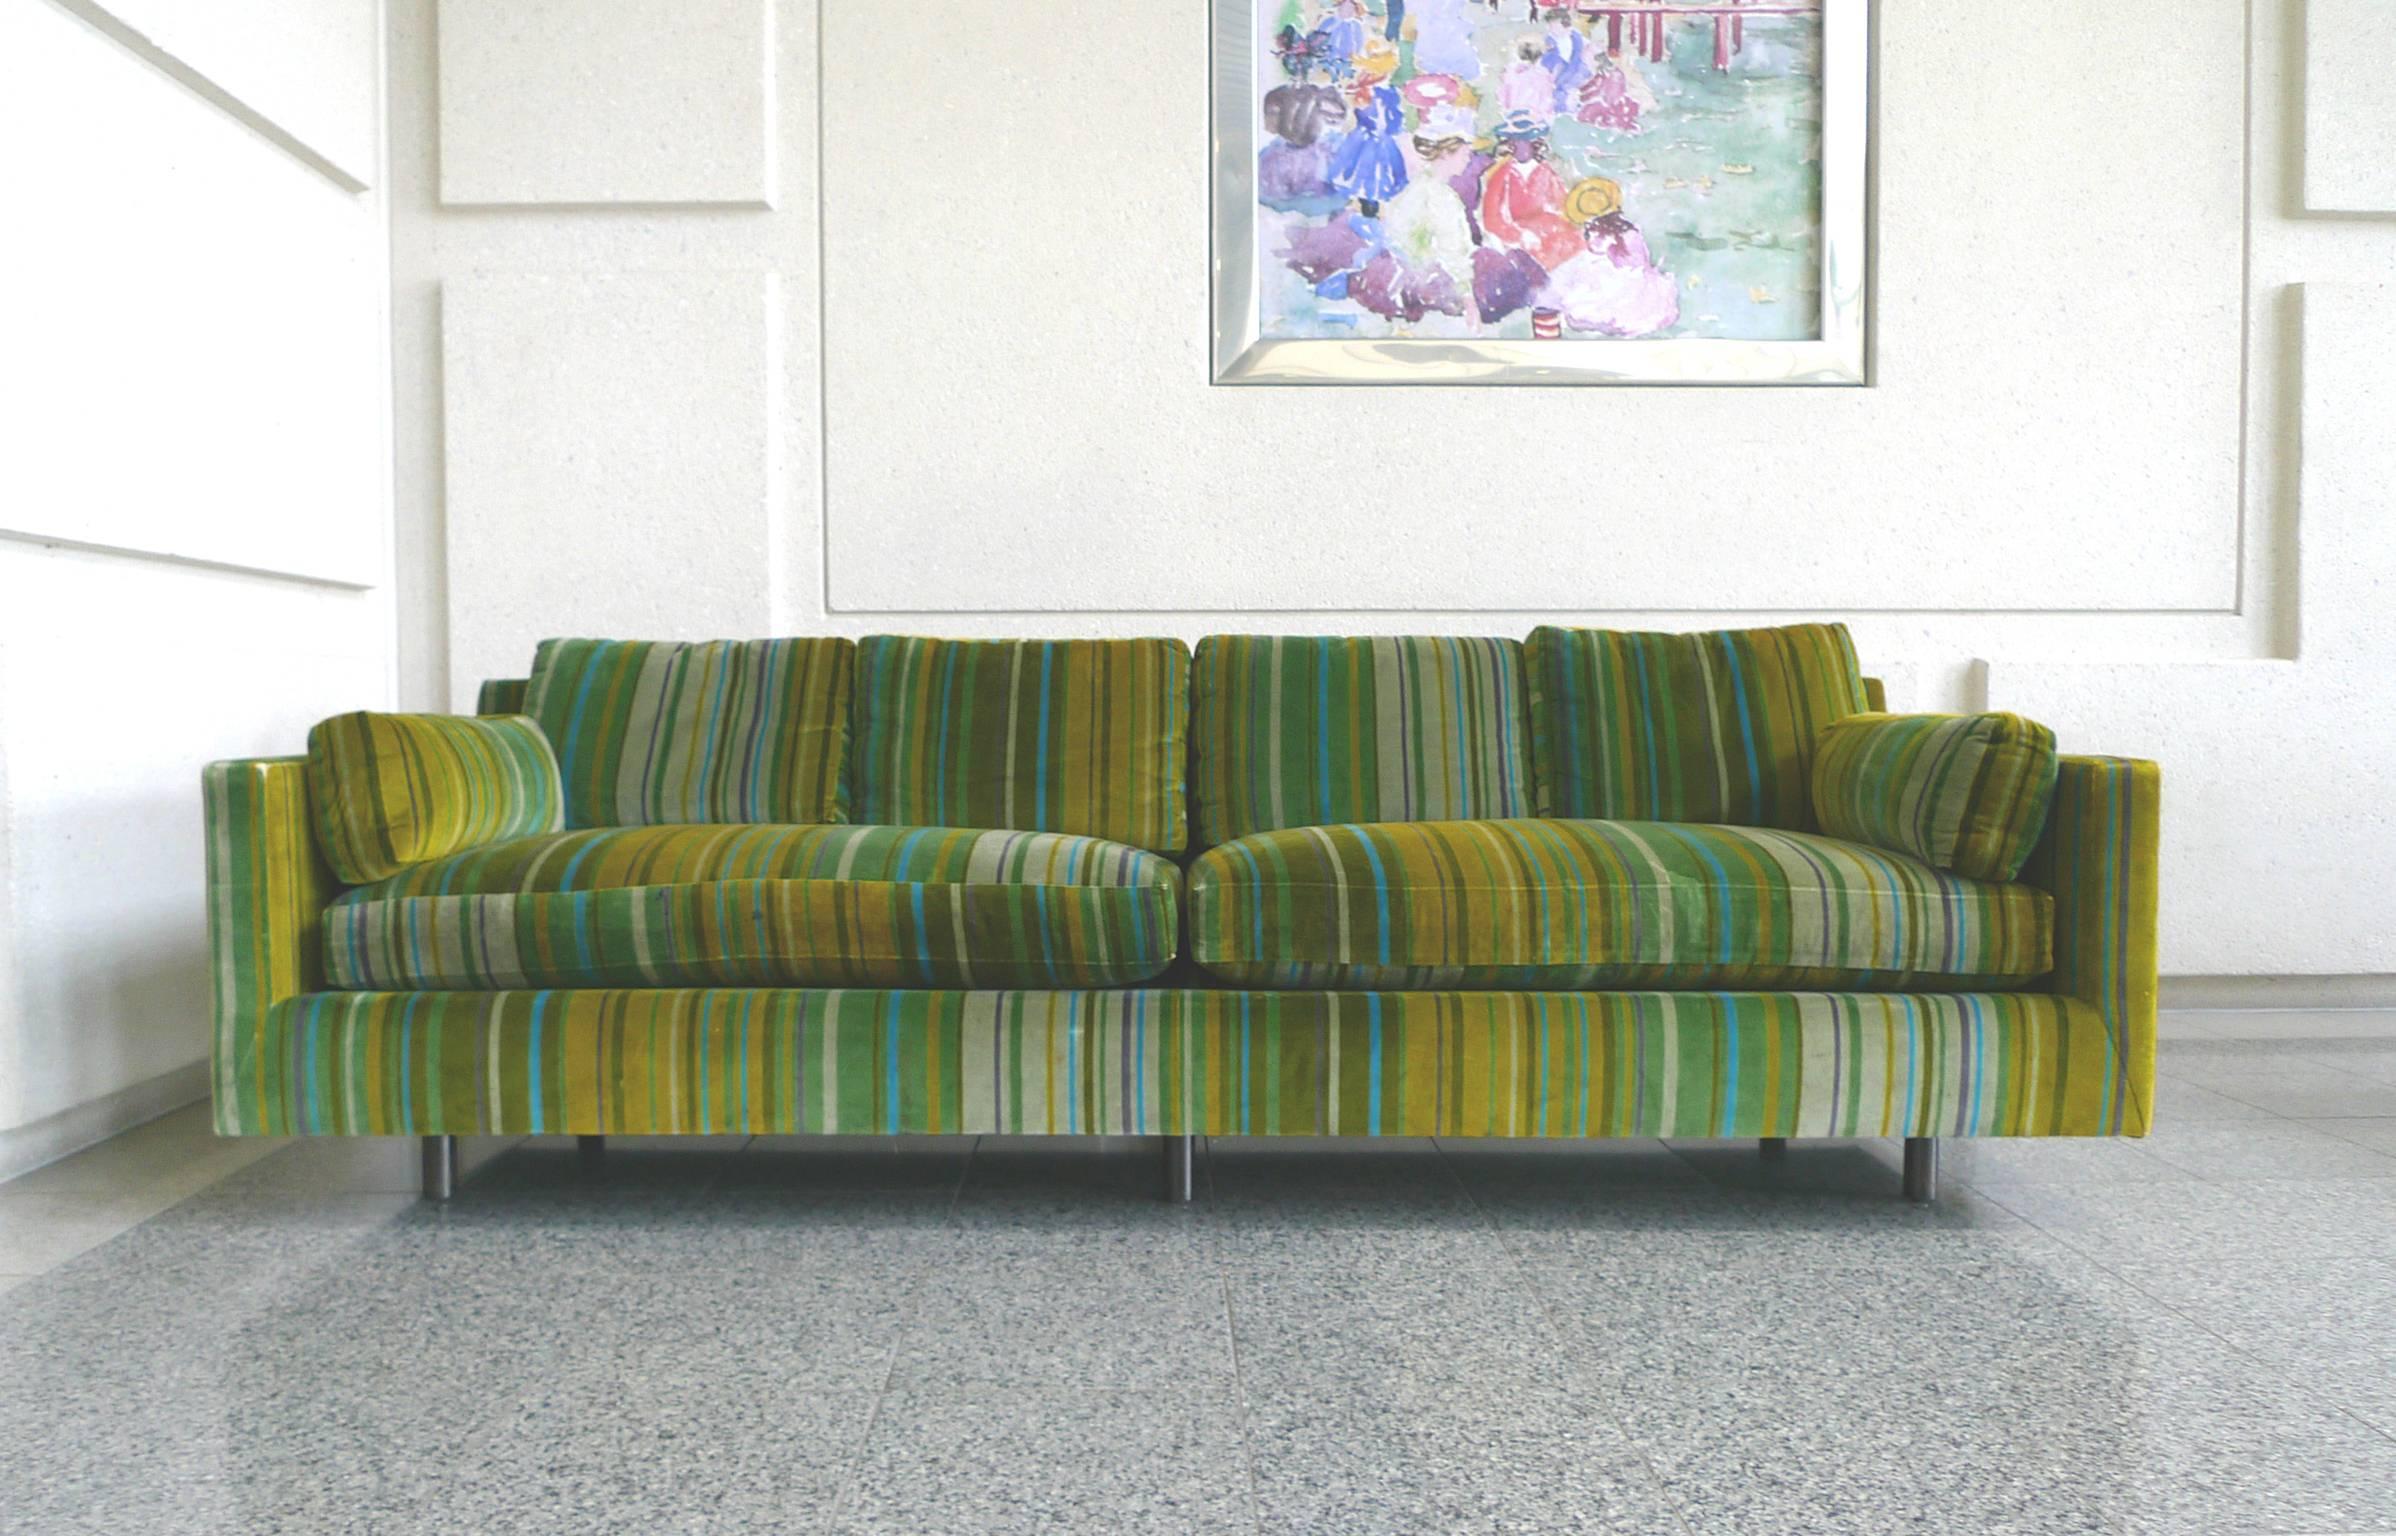 These Mid-Century Modern sofas were designed by Harvey Probber. The lines are simple and spare. They are enlivened by a striped velvet upholstery, in a palette of alternating green hues, designed by Jack Lenor Larsen. Each sofa has two-seat cushions